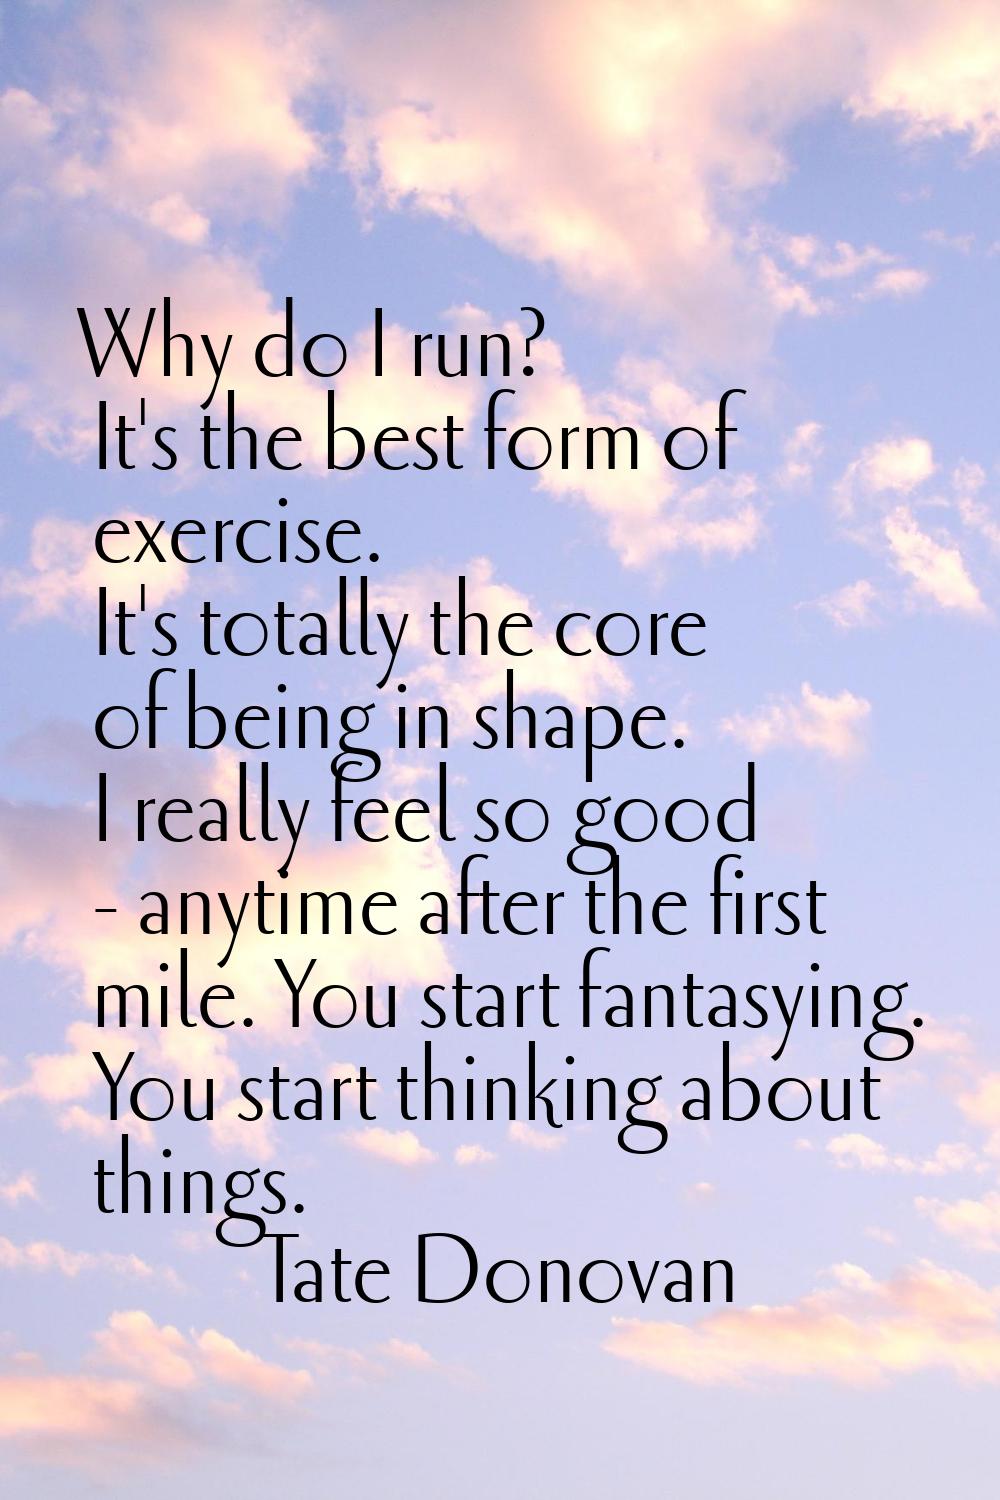 Why do I run? It's the best form of exercise. It's totally the core of being in shape. I really fee